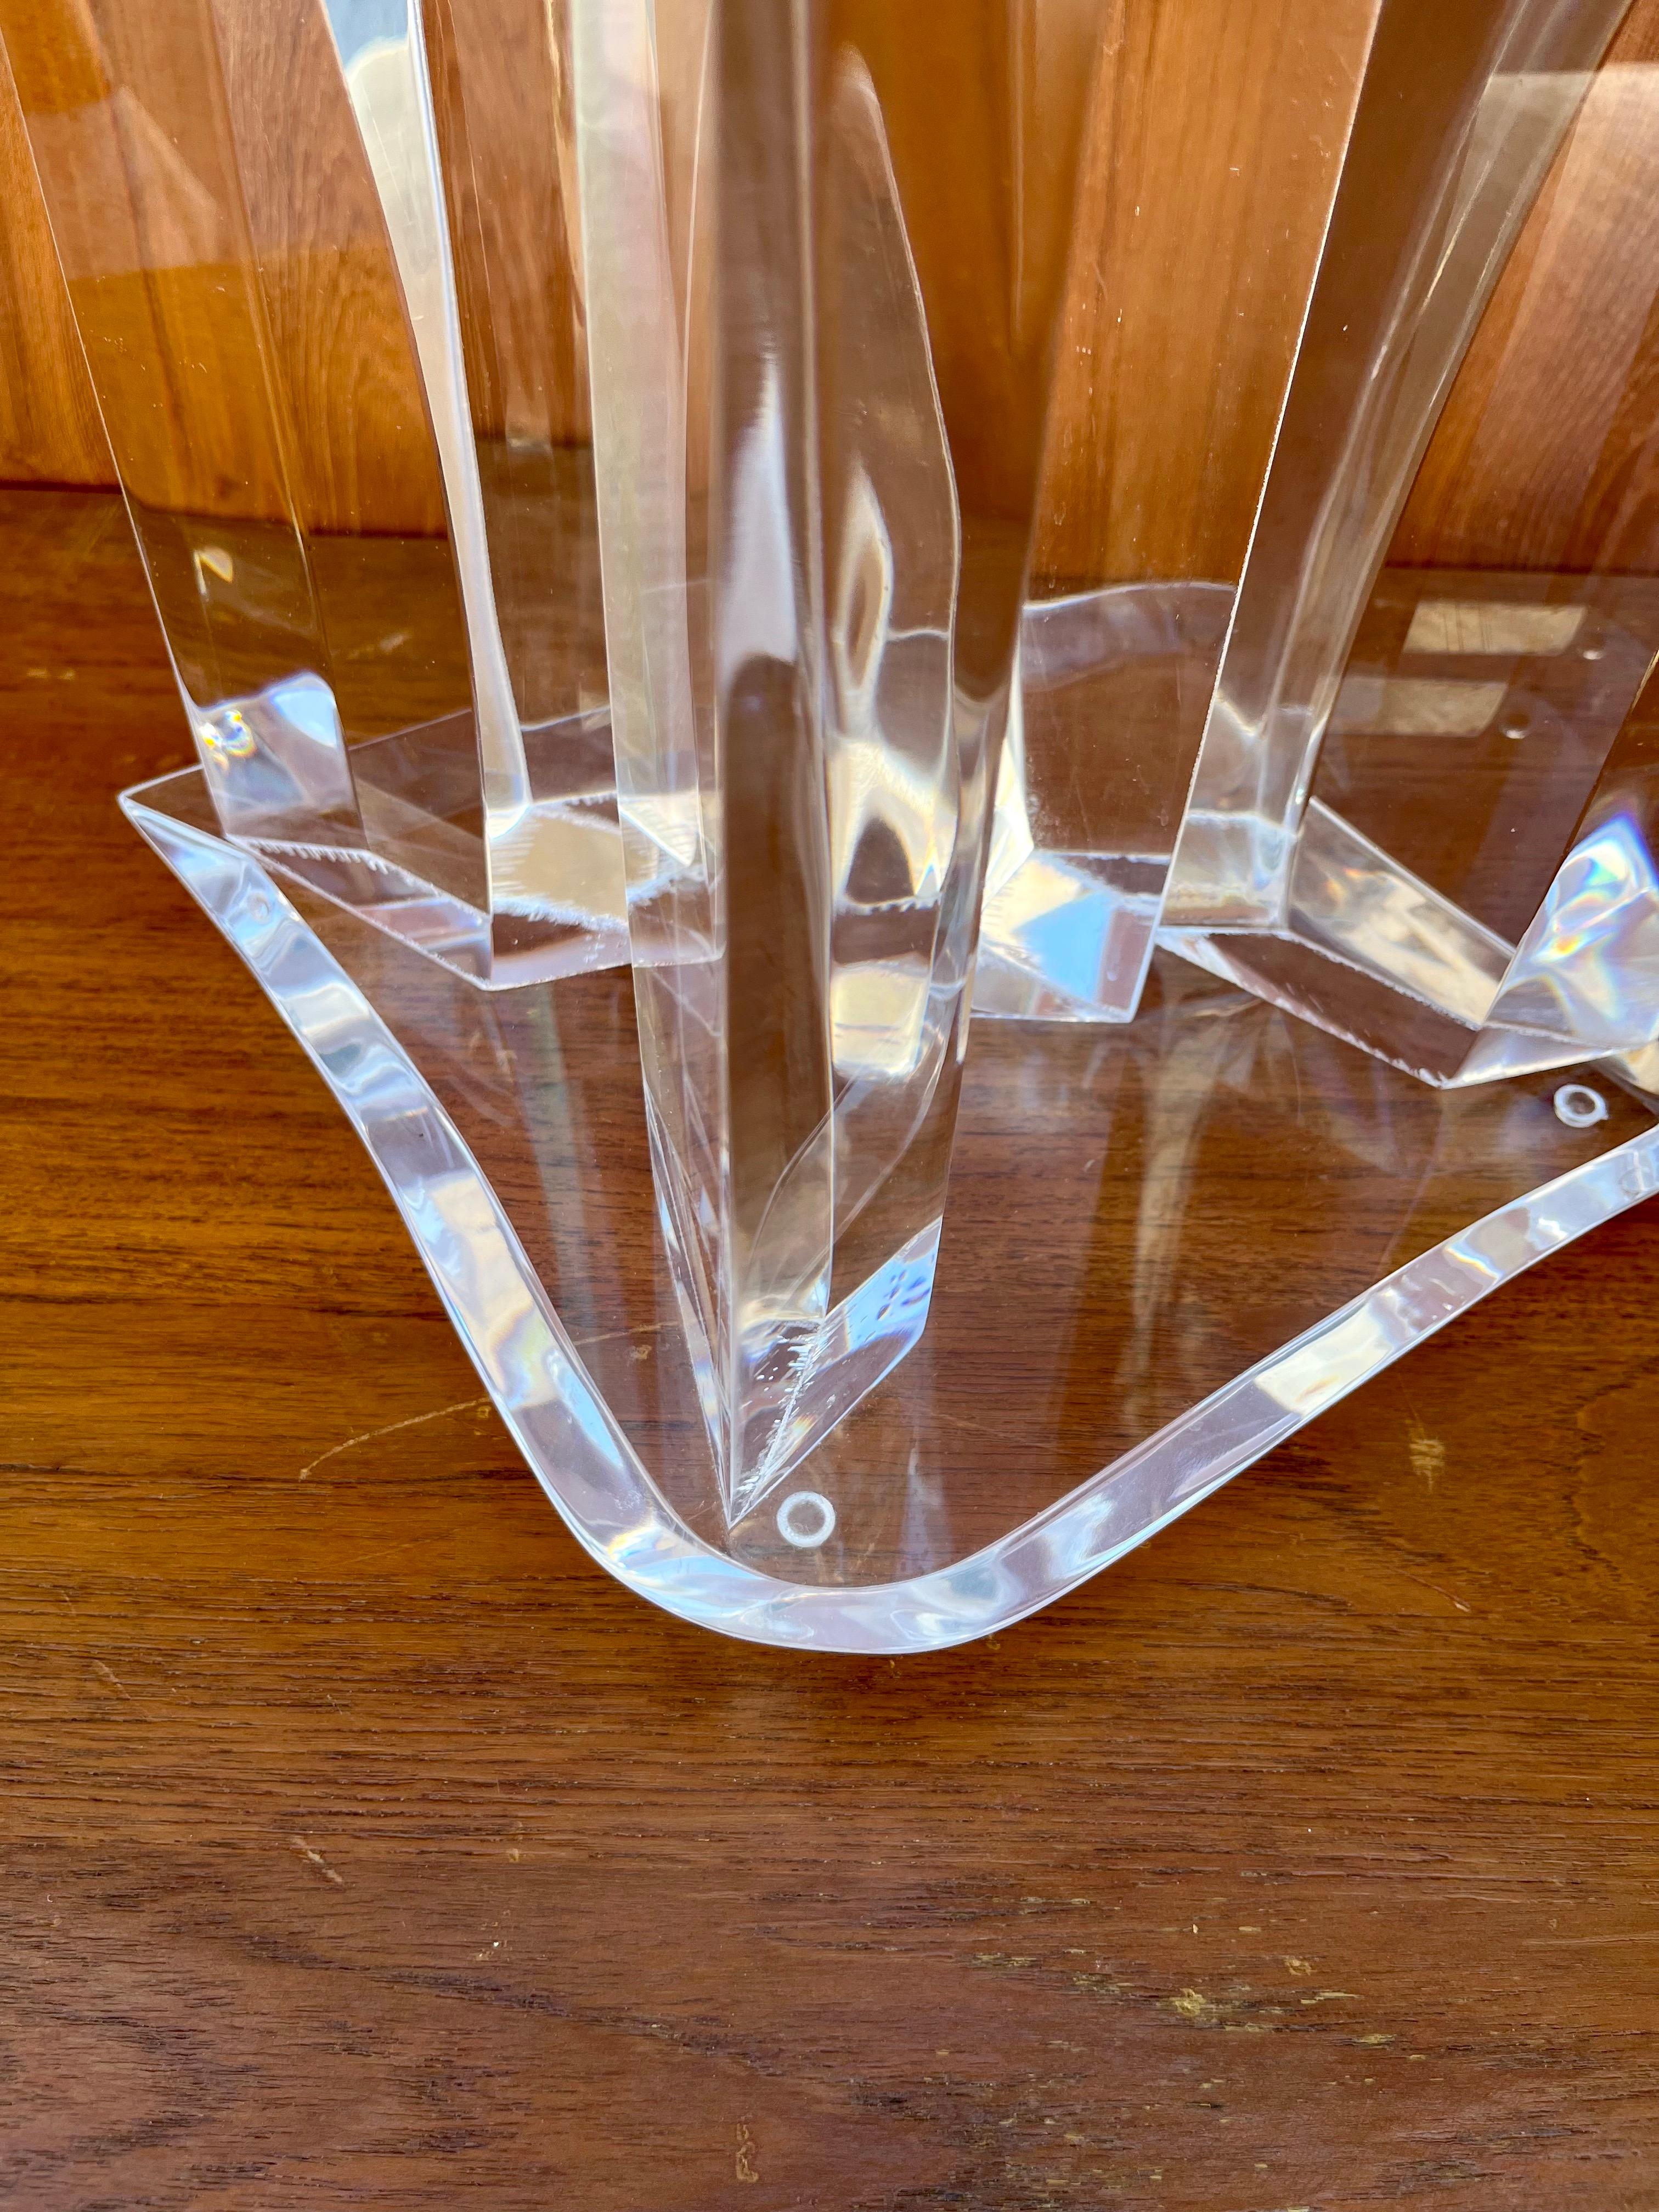 1970s Mid-Century Modern Abstract Lucite Sculpture in the Hivo Van Teal's Style For Sale 4